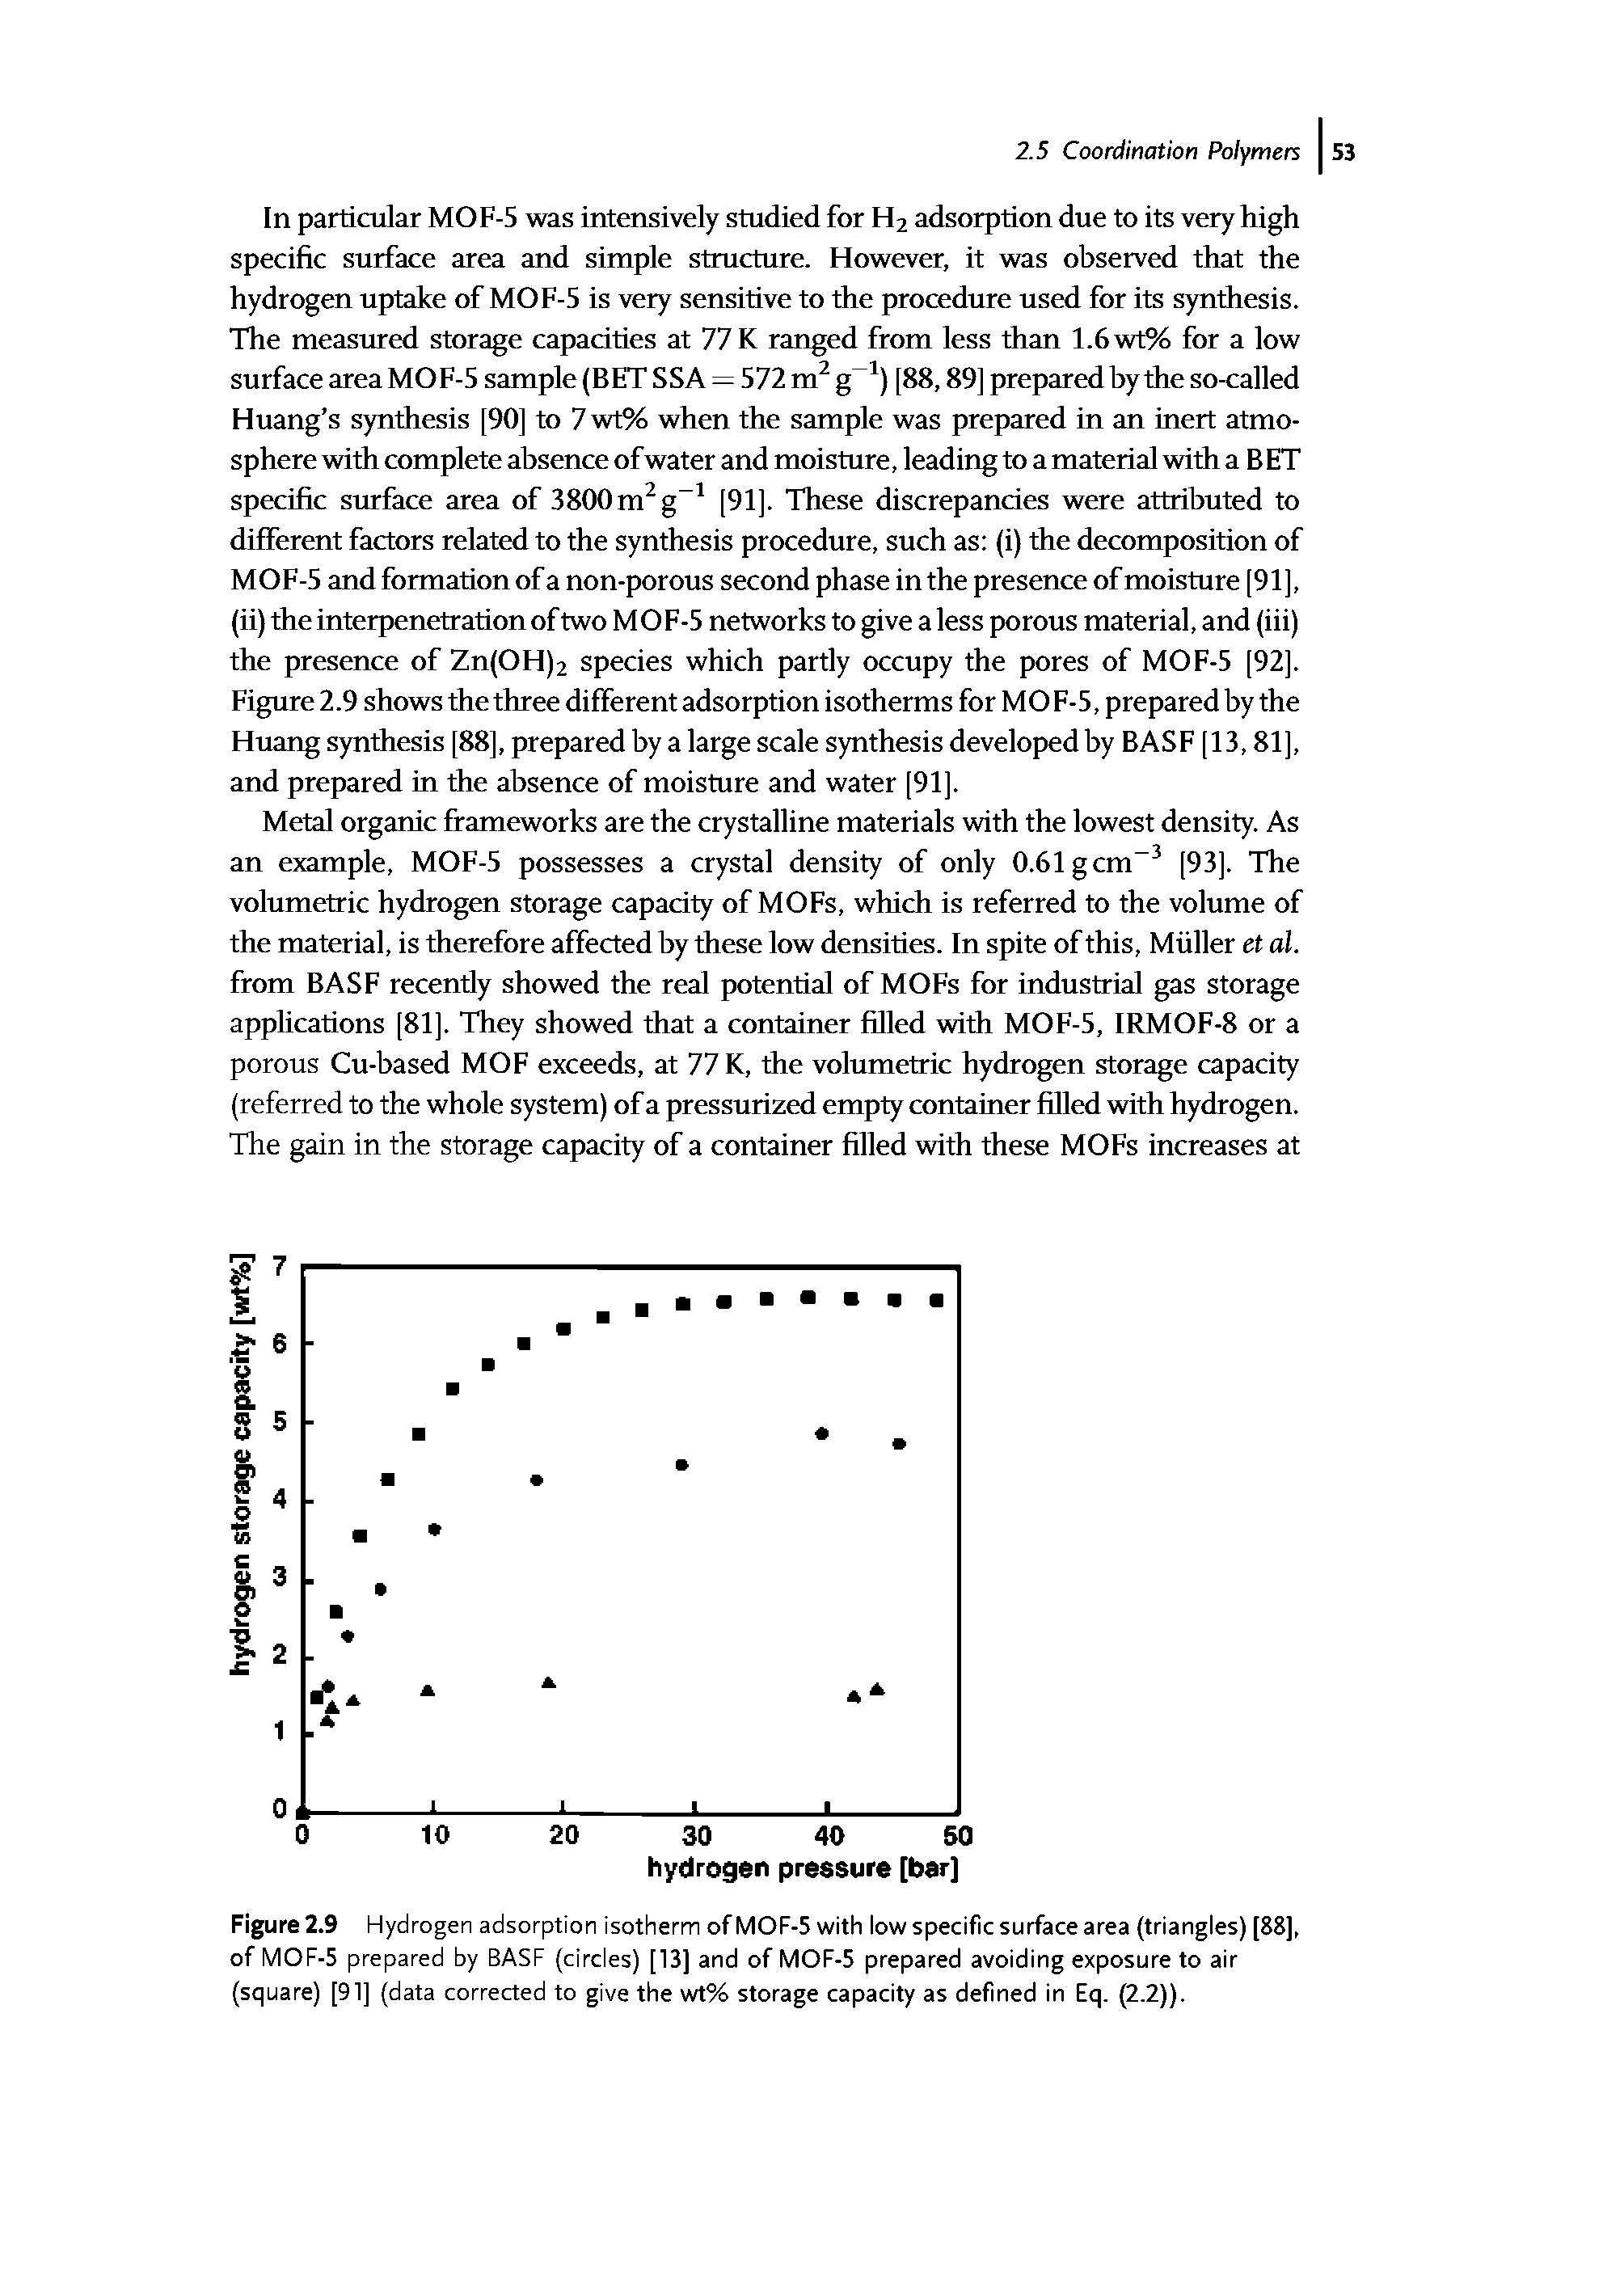 Figure 2.9 Hydrogen adsorption isotherm of MOF-5 with low specific surface area (triangles) [88], of MOF-5 prepared by BASF (circles) [13] and of MOF-5 prepared avoiding exposure to air (square) [91] (data corrected to give the wt% storage capacity as defined in Eq. (2.2)).